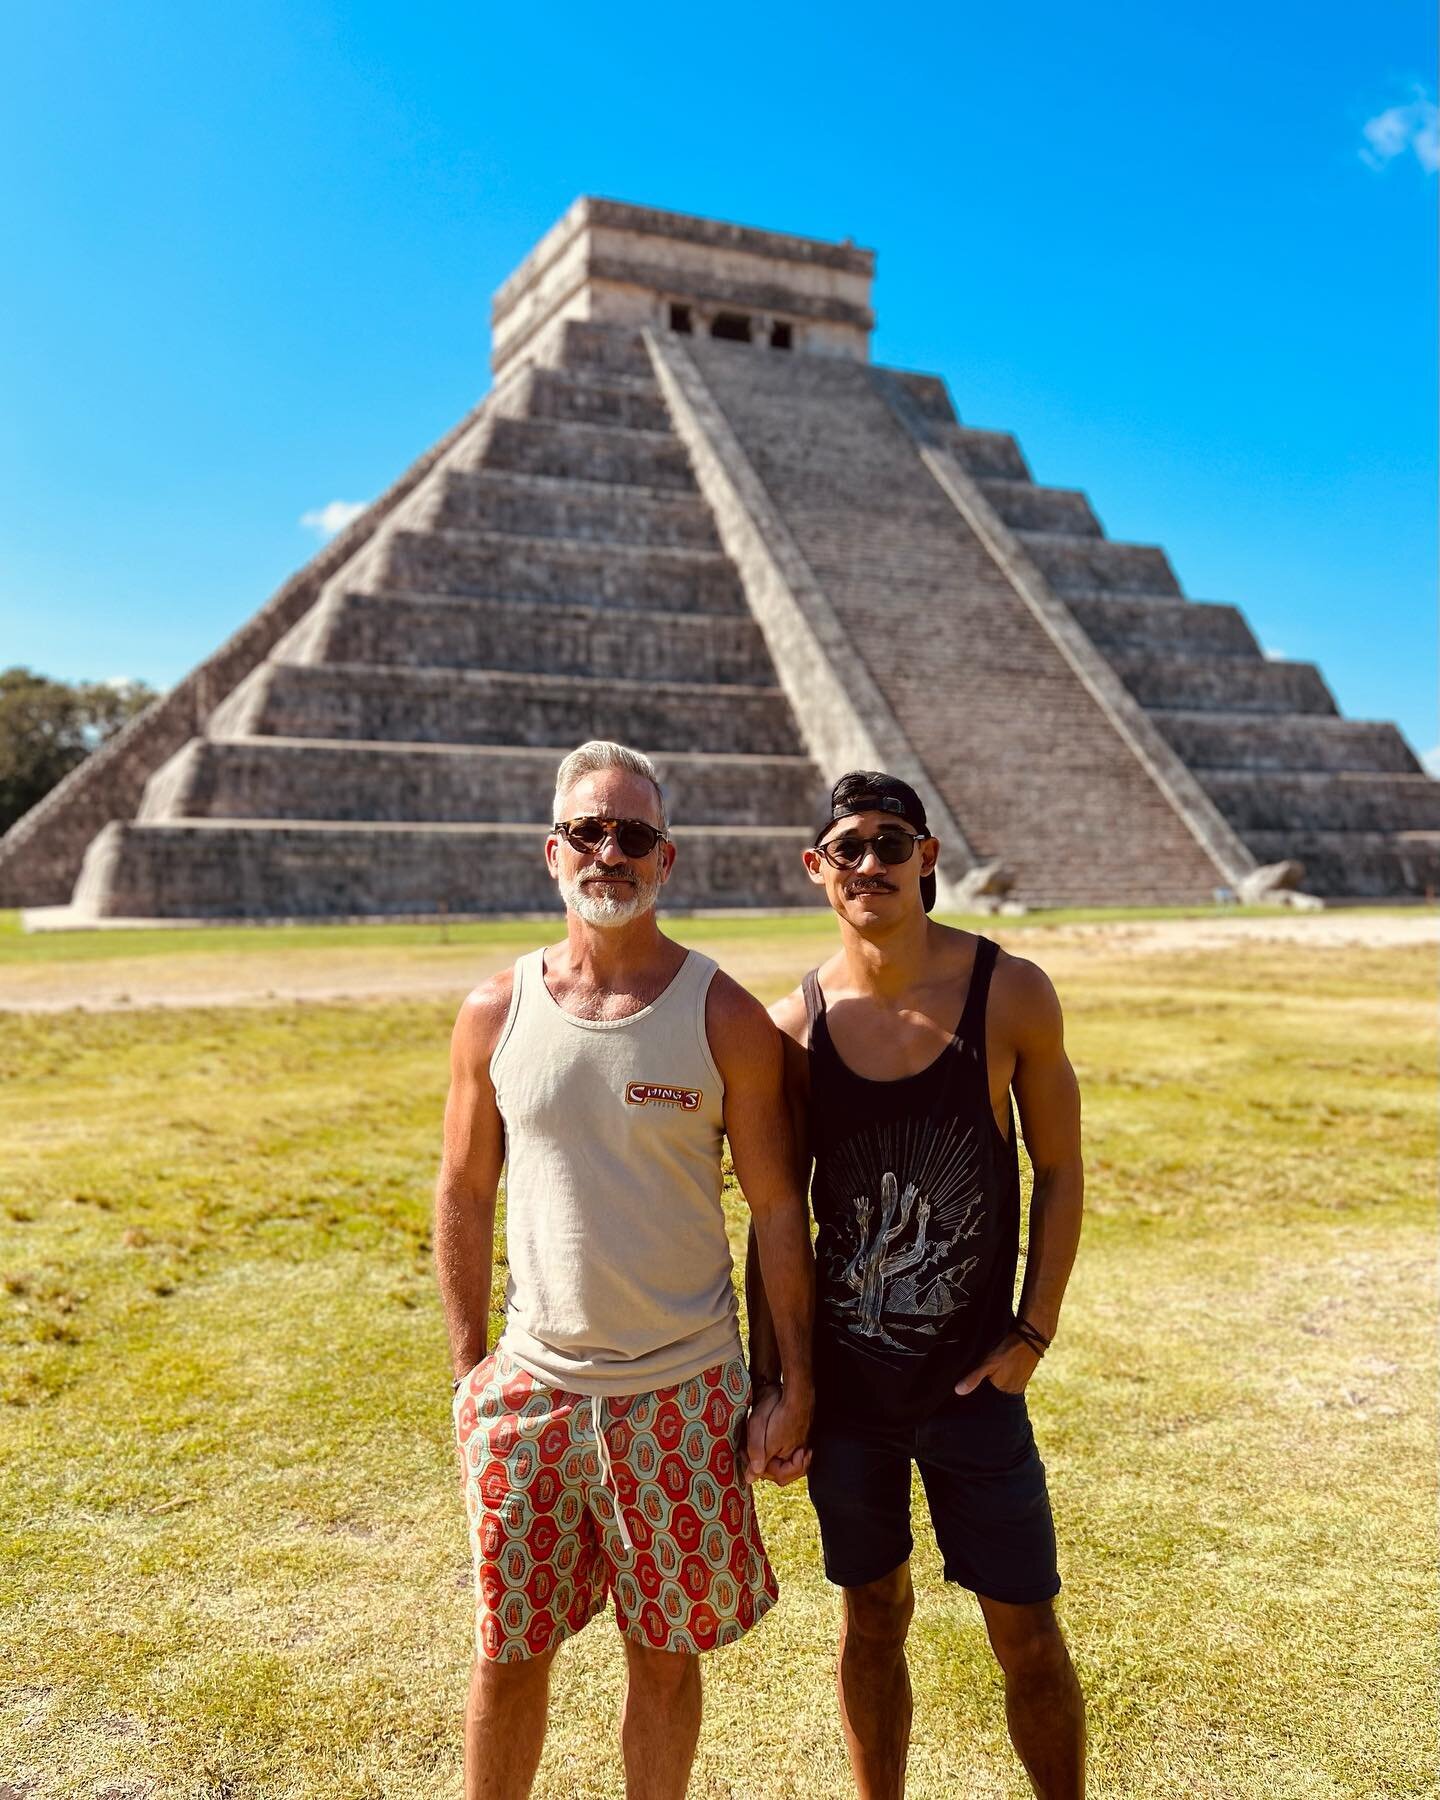 I&rsquo;ll take Tulum with a side of Chich&eacute;n Itz&aacute;. Saw my first &ldquo;New Wonder of The World&rdquo; (Bennett&rsquo;s 4th Wonder). Wonderful!